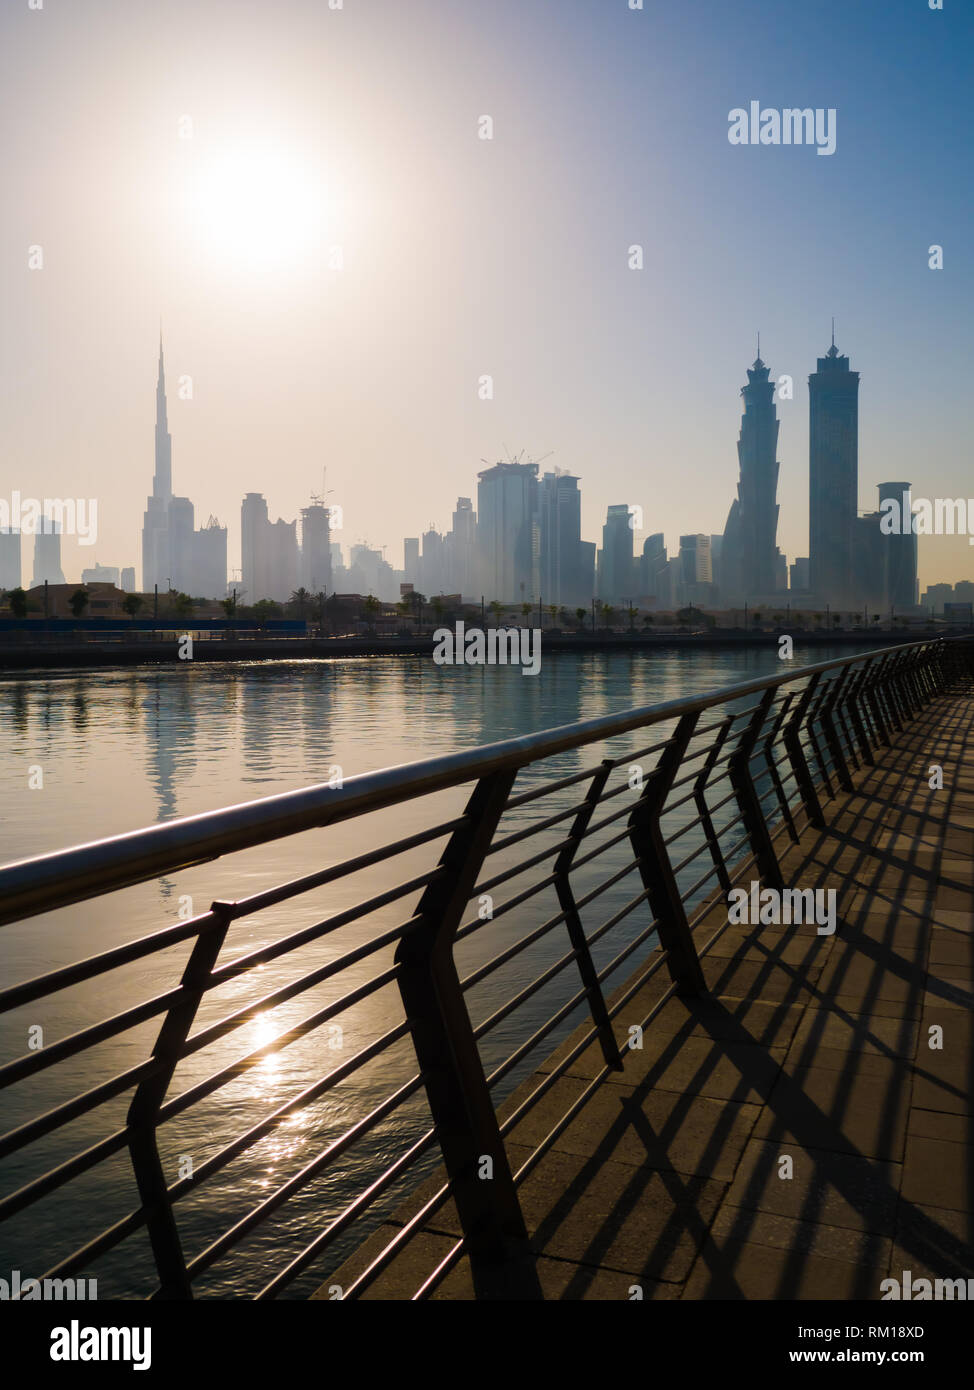 Panorama of the city of Dubai early in the morning at sunrise with a bridge over the city channel Dubai Greek. Stock Photo